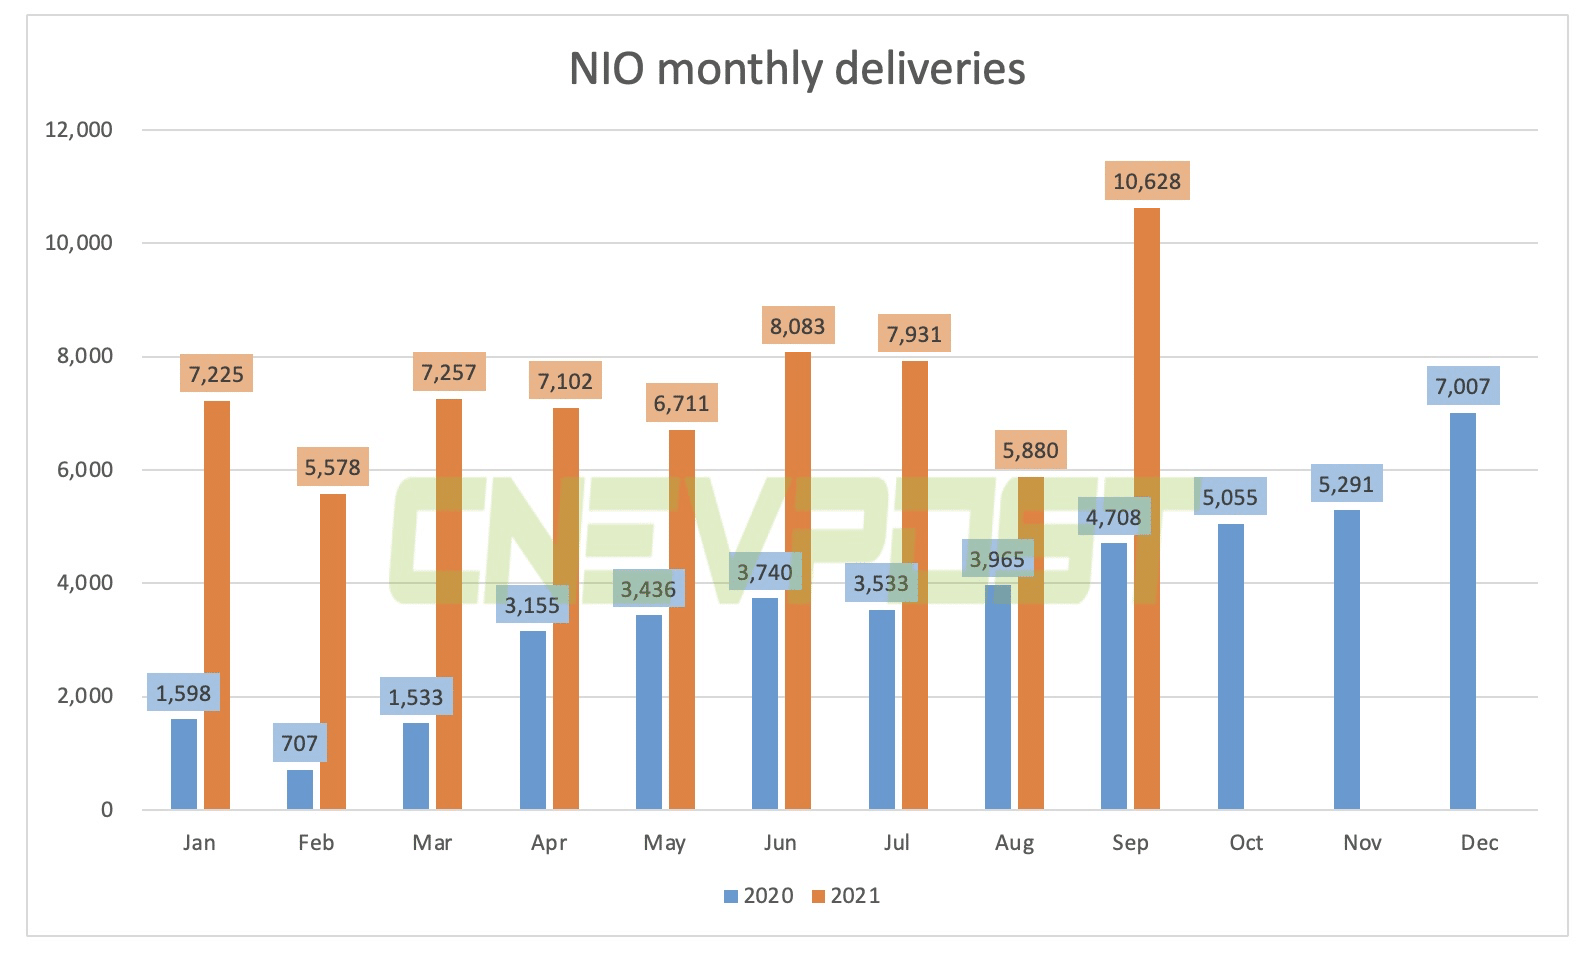 BREAKING: NIO delivered record 10,628 units in Sept, surpassing 10k threshold for first time-CnEVPost